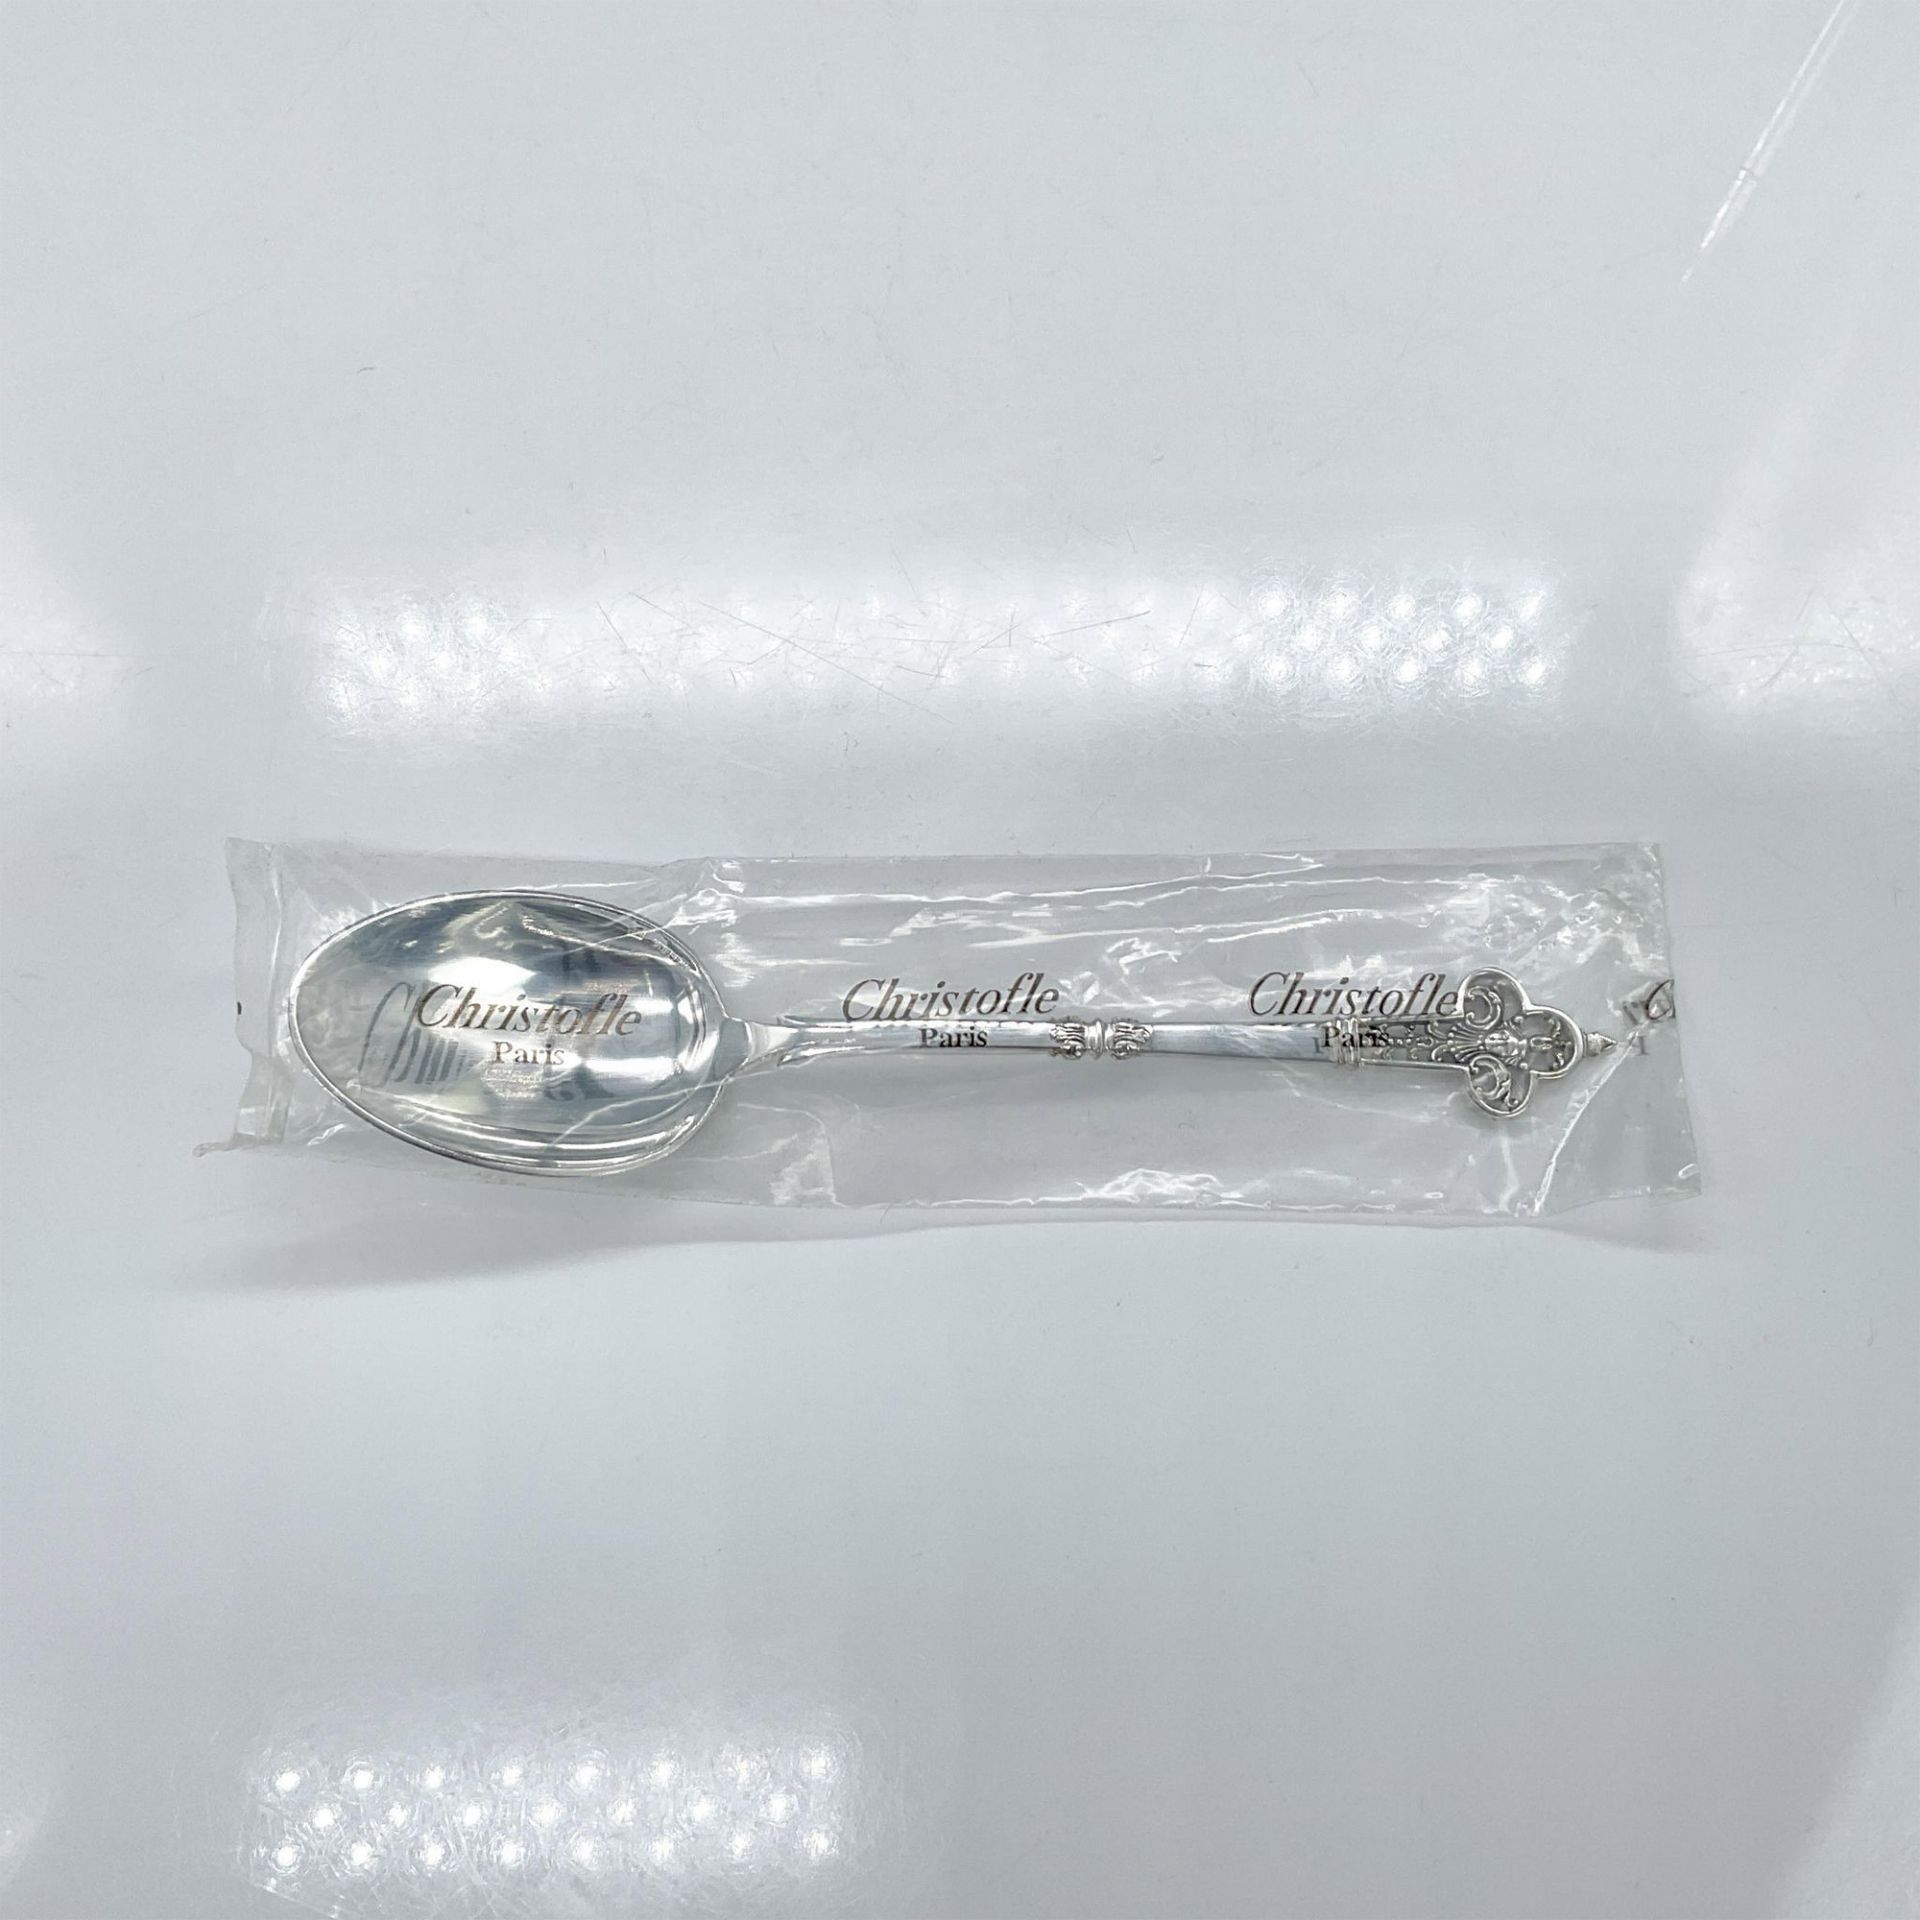 Christofle Sterling Silver Tablespoon, Renaissance - Image 3 of 4